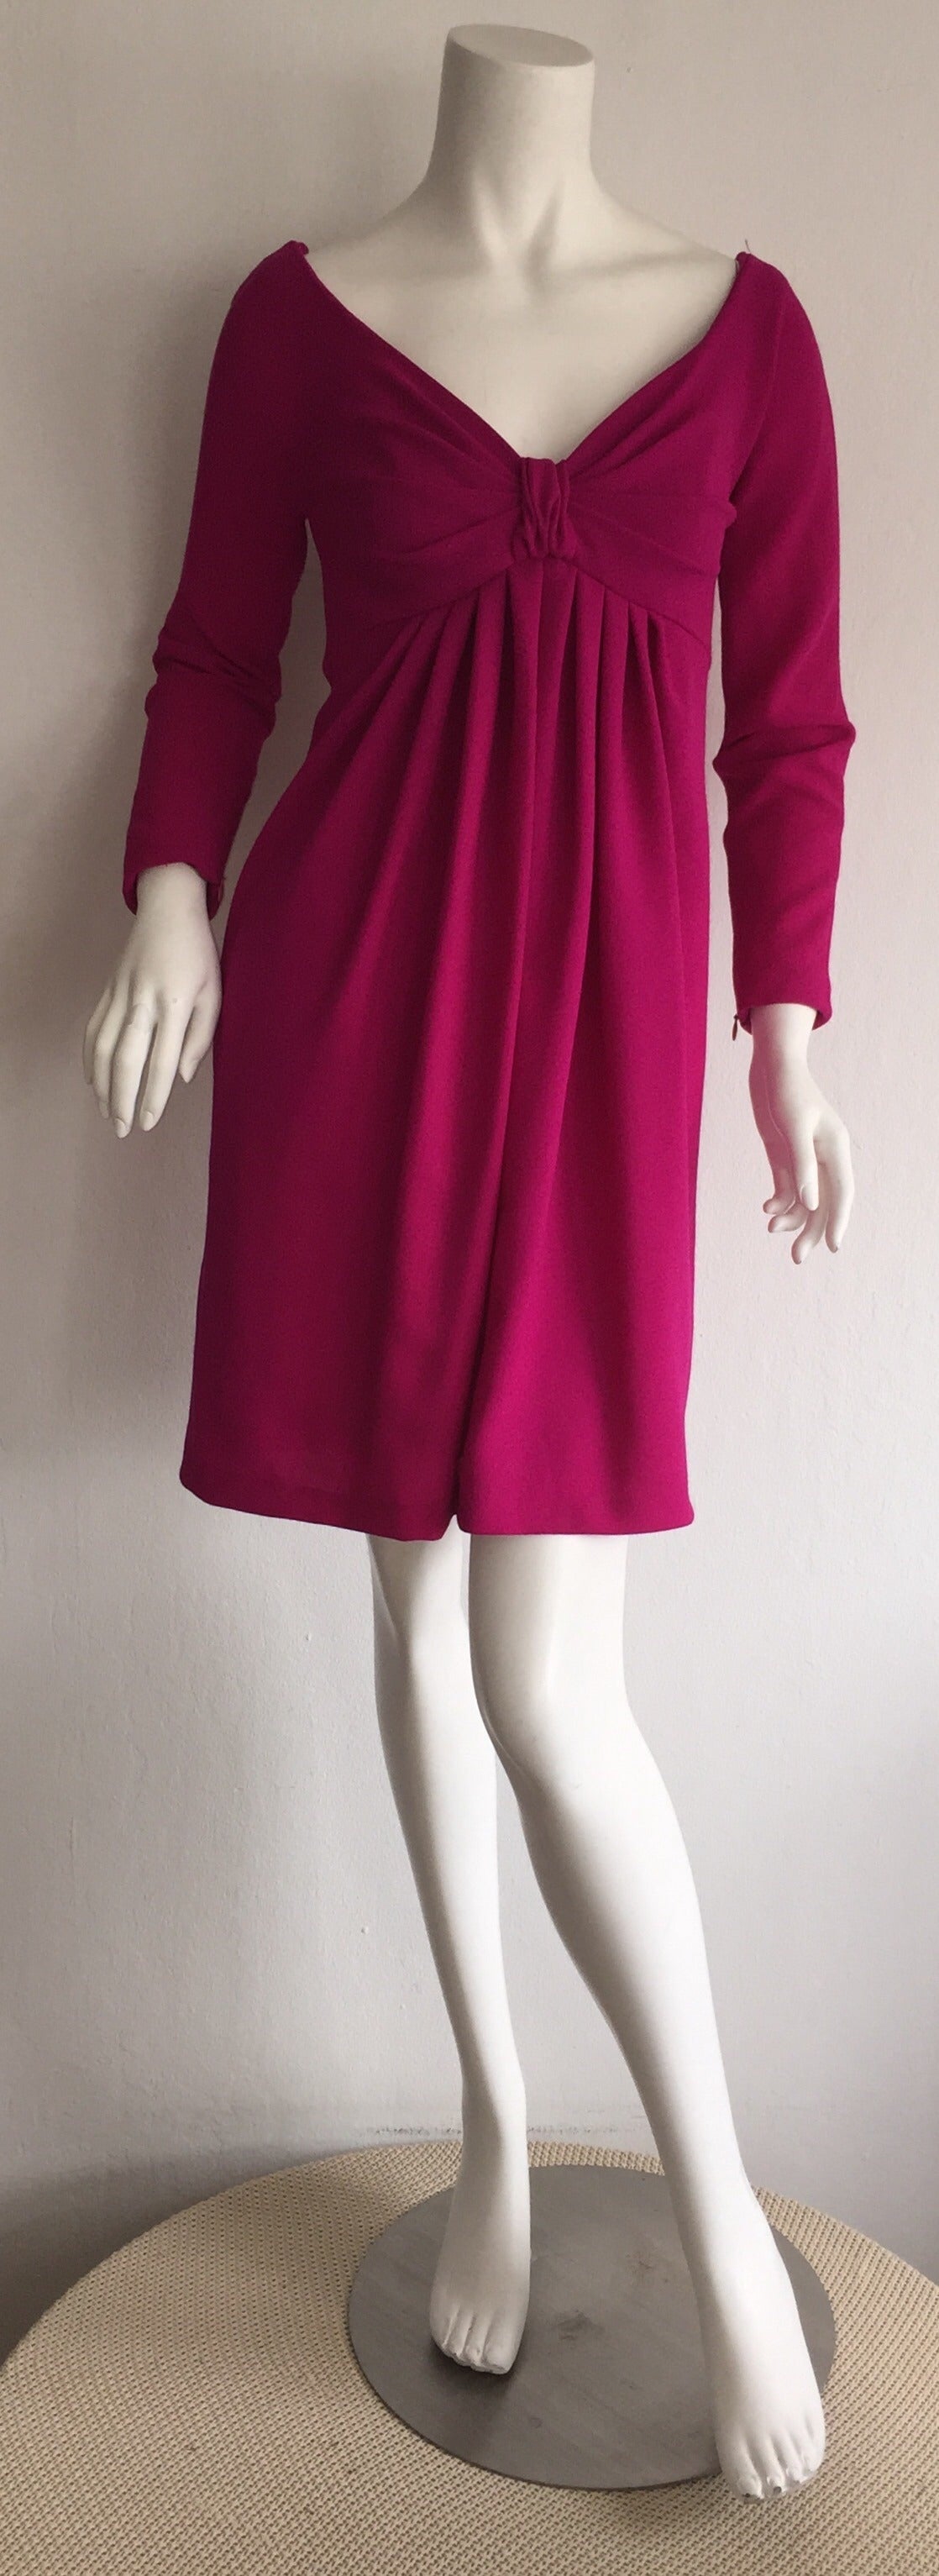 Absolutely beautiful vintage Carolyne Roehm for Neiman Marcus babydoll dress! Impeccable construction to this beauty! Gorgeous vivid fuchsia color. Flattering fit, with a slight empire wait. Long sleeves, with hidden zippers up the sleeve. Can